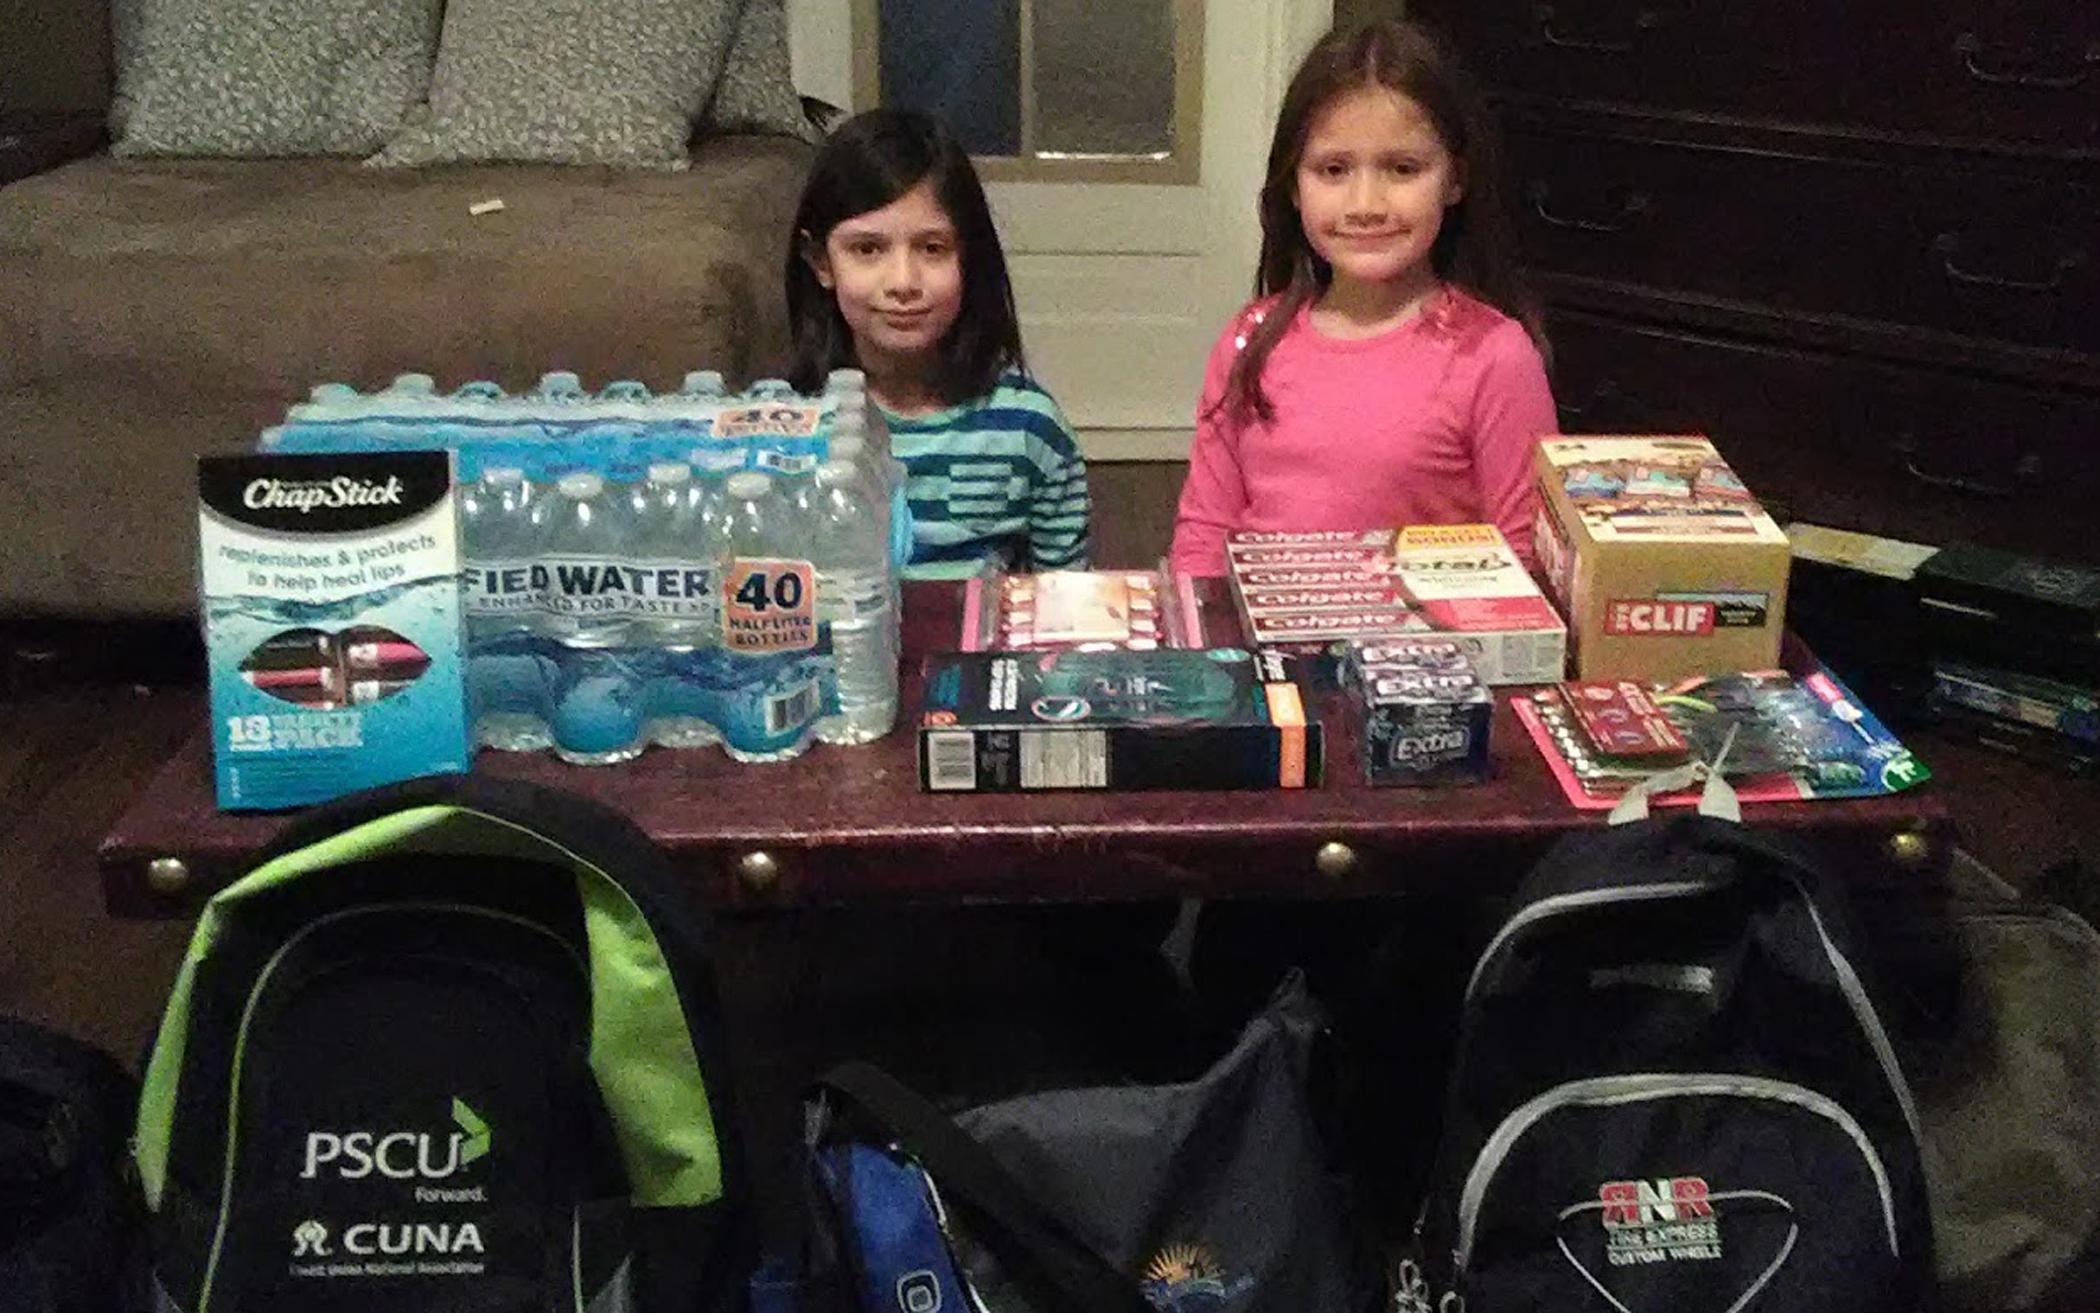 Veronica (l) and Hannah Gross with their Love2Go bags.